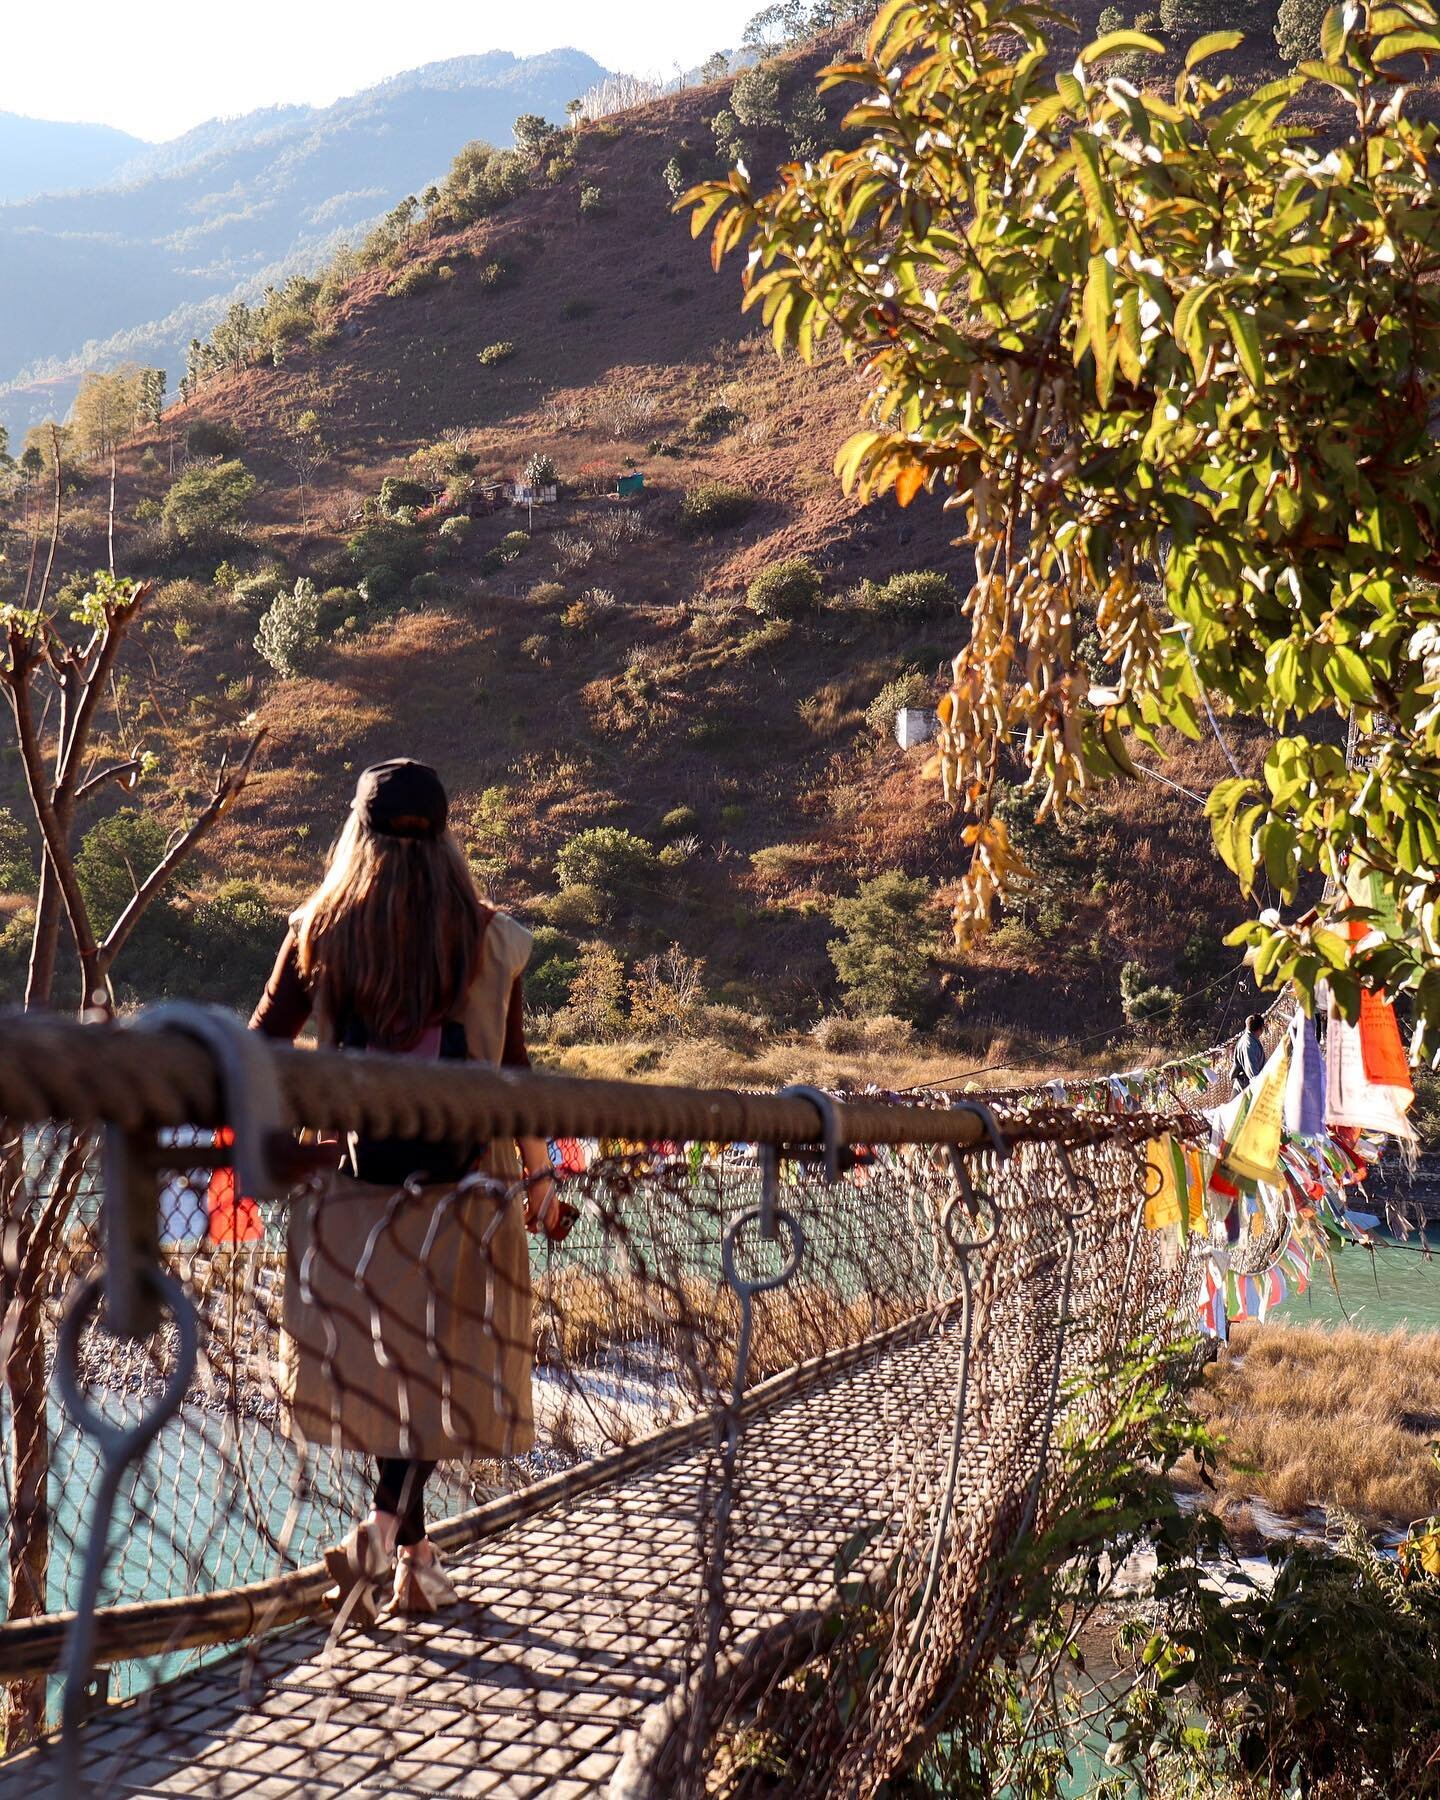 🇧🇹 Snapshots of Punakha and Wangdue Phodrang&hellip;

Well overdue catch-up on the rest of my Bhutan and India trip incoming&hellip;

1. Dreamy Punakha Suspension Bridge at sunset 
2, 5, 6. The recently reopened Wangdue Phodrang Dzong (fortress)
3,